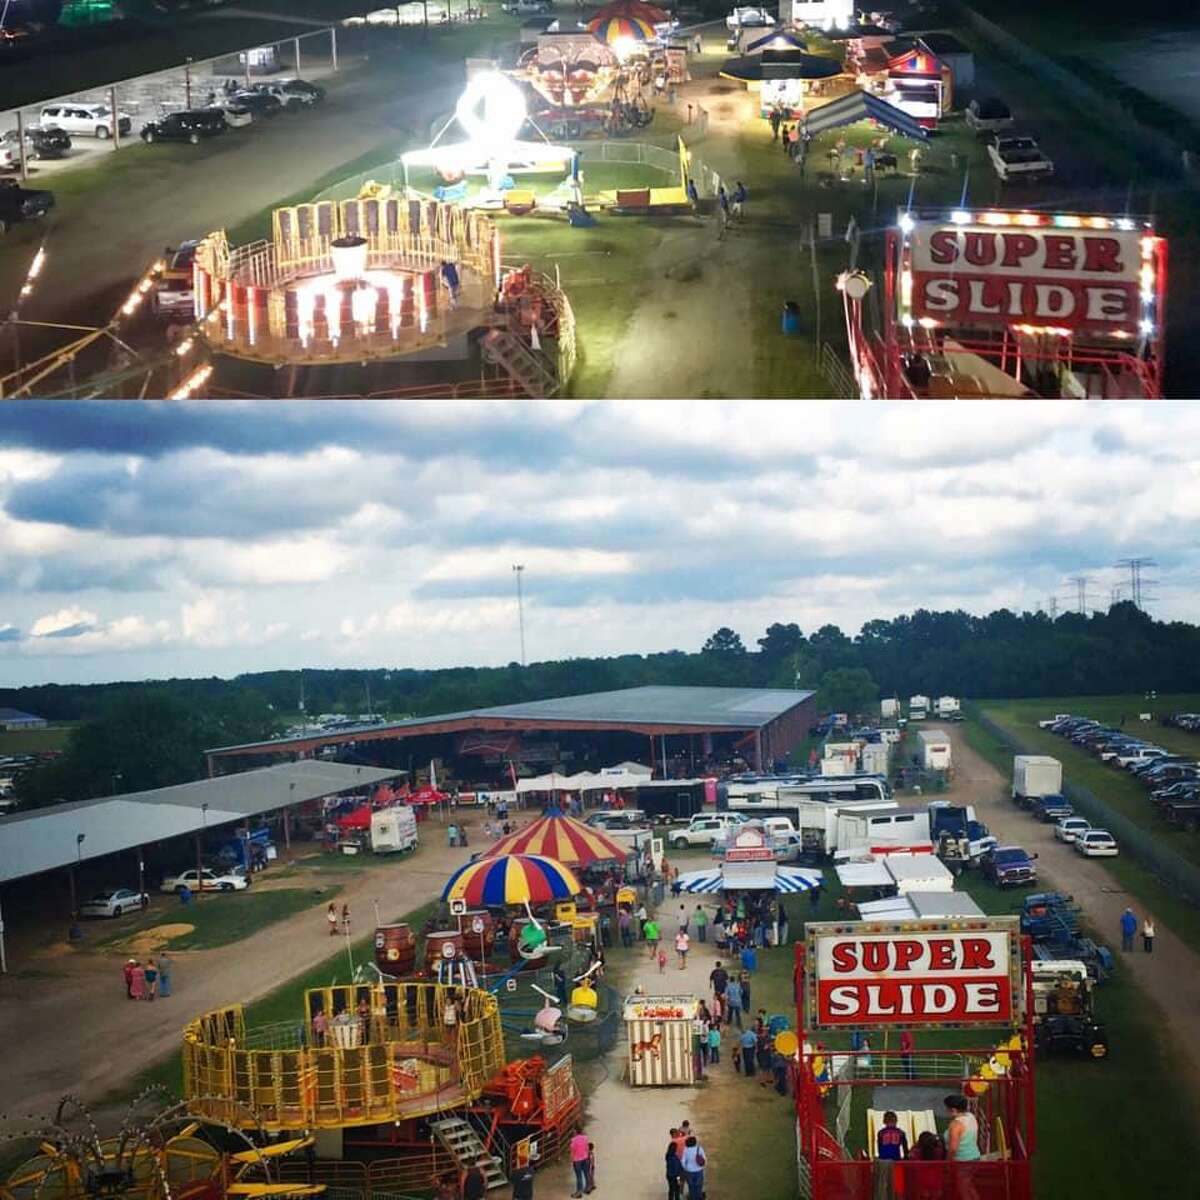 Crosby Fair and Rodeo carries on tradition